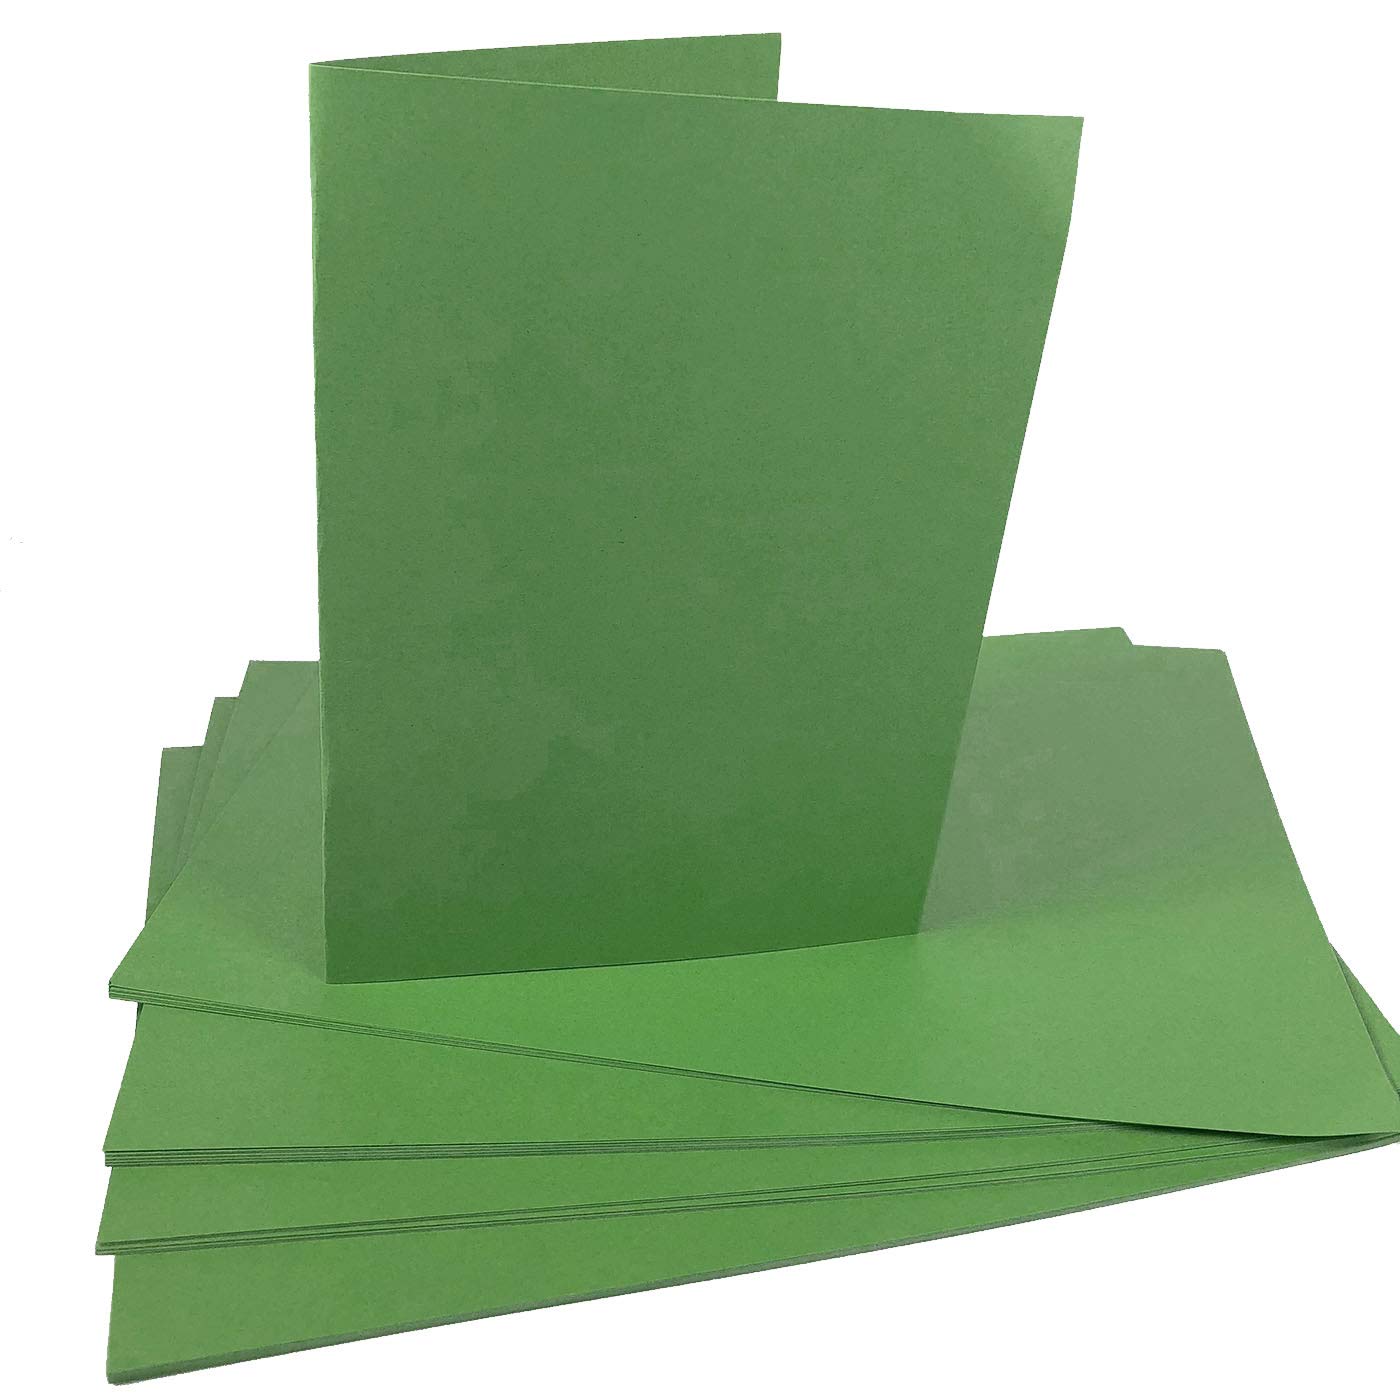 A4 Green Card Paper Printer - 160gsm 40 Sheets - Coloured Craft Card - Suitable for Craft, Printing, Copying, Photocopiers